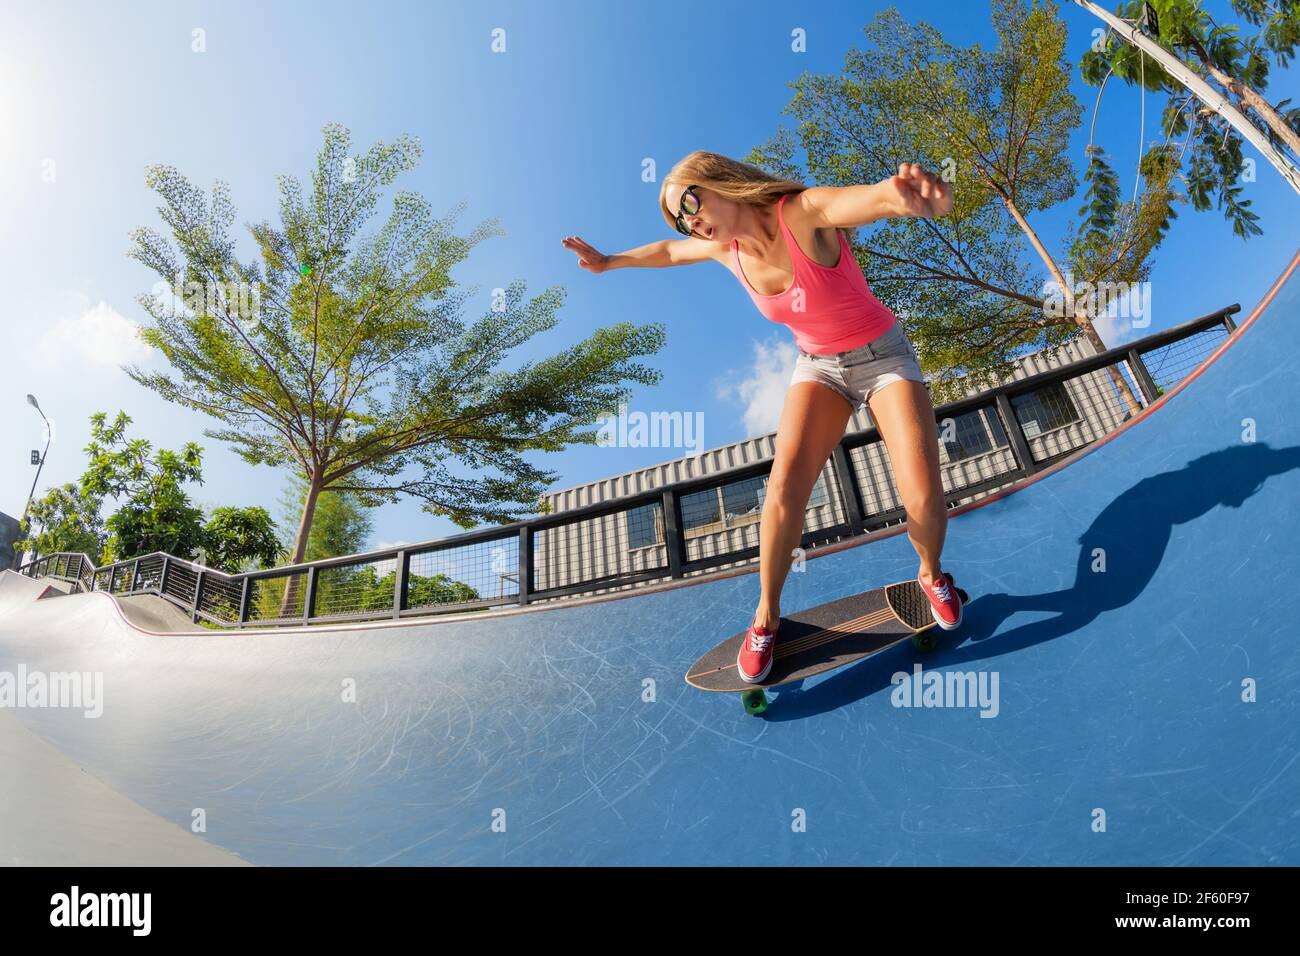 Skateboarder in action. Young woman making trick on surf skate longboard in  outdoor skatepark bowl. Surfskate and skateboard riding lessons at summer  Stock Photo - Alamy